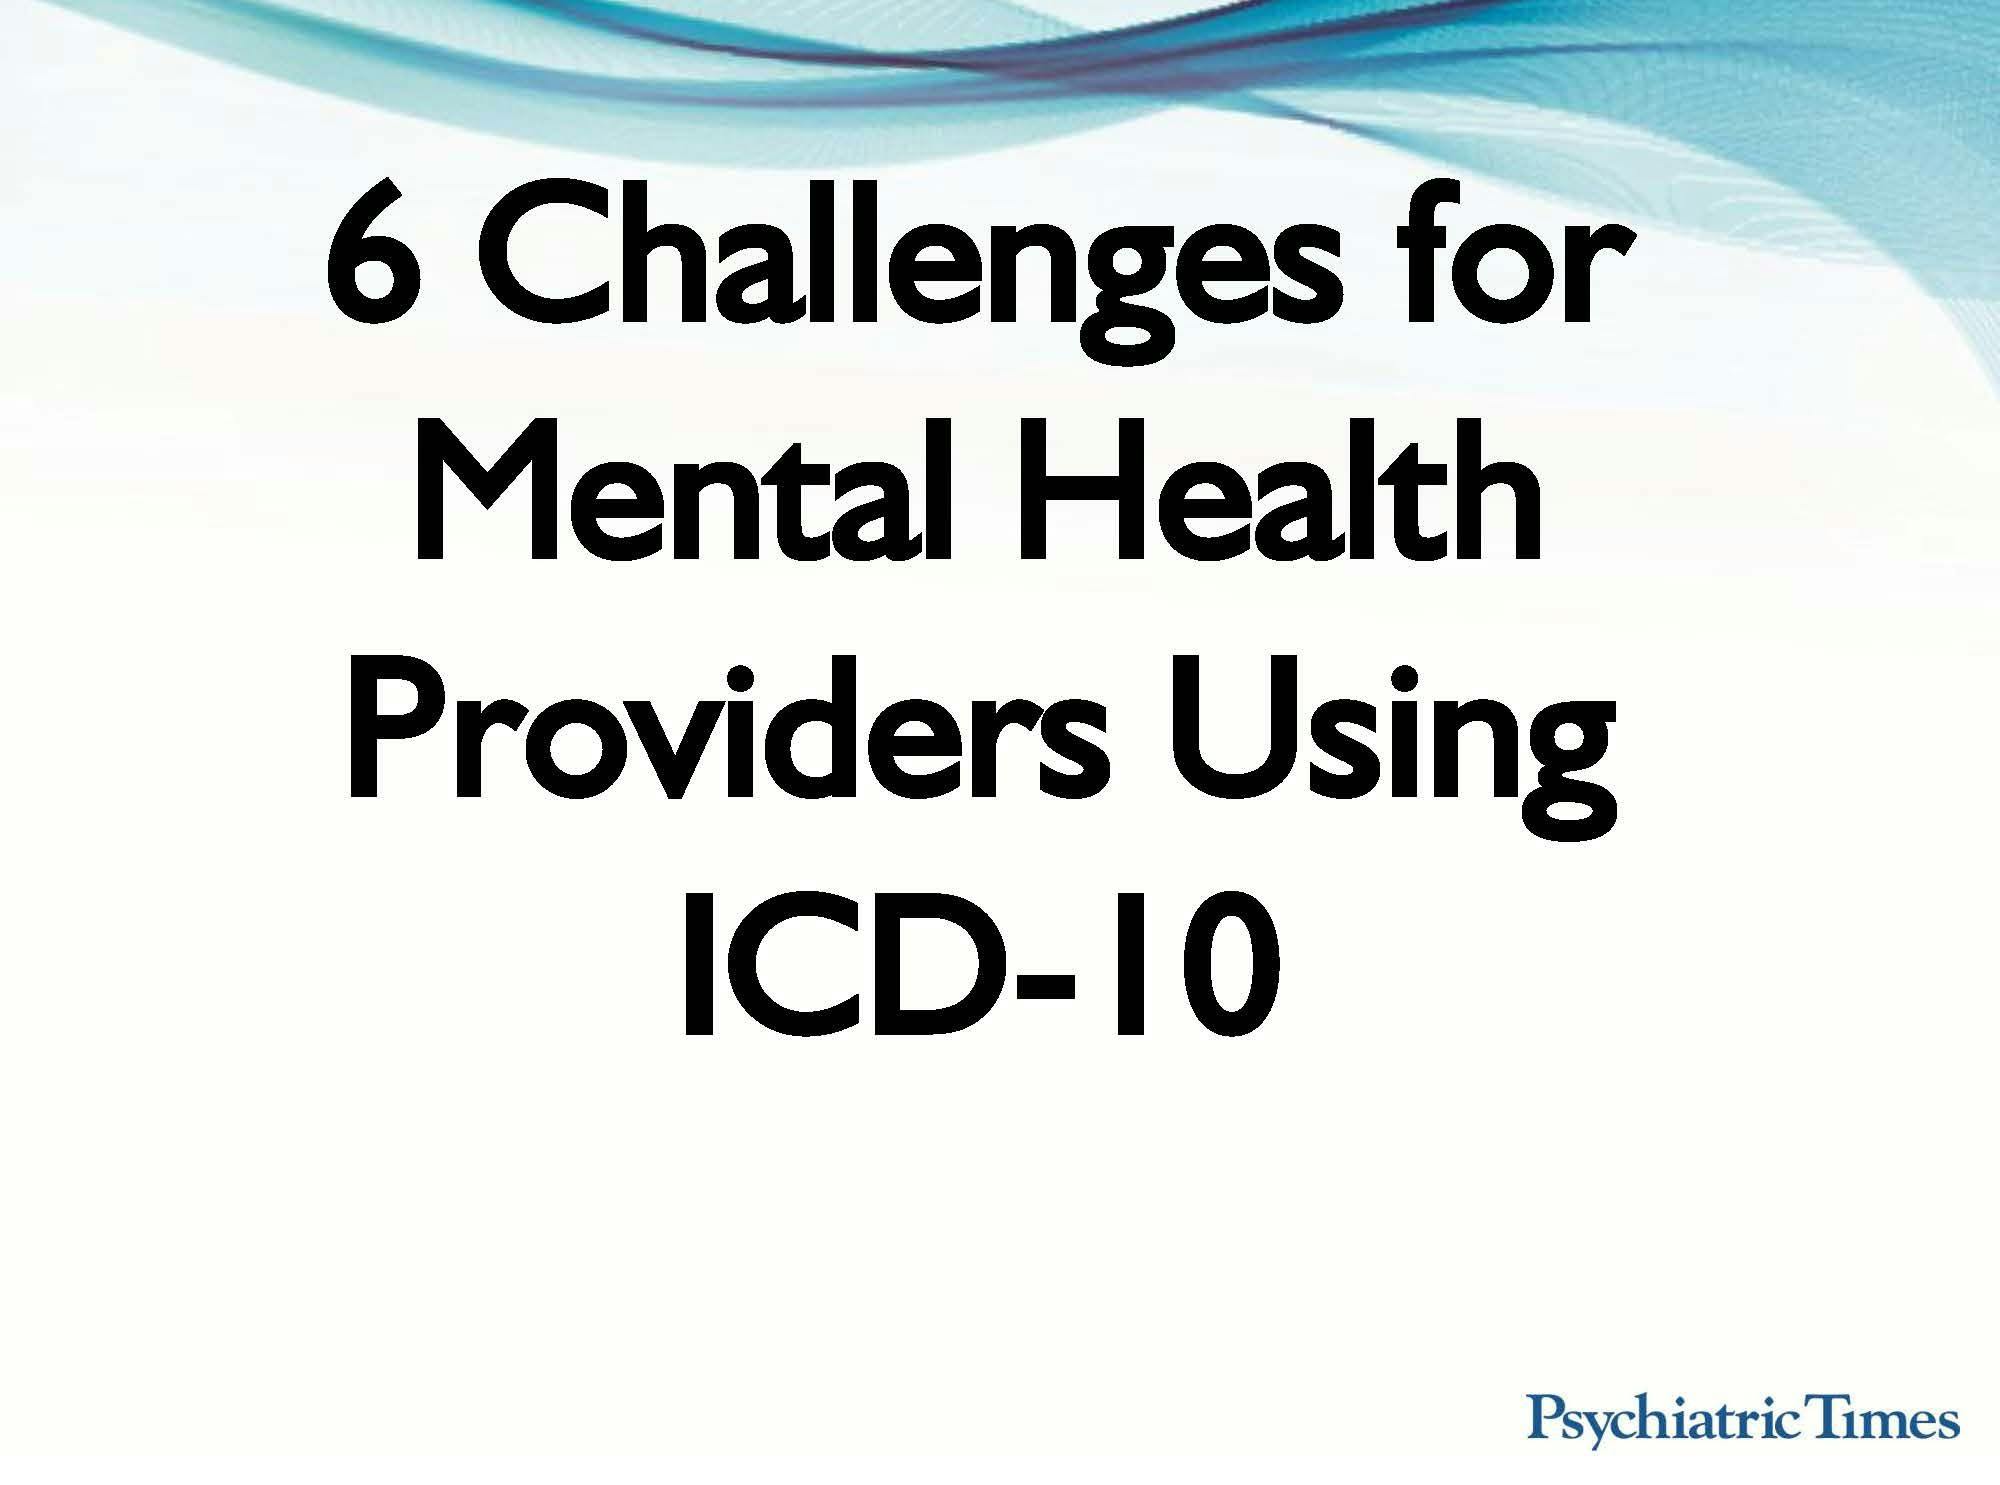 6 Challenges for Mental Health Providers Using ICD-10